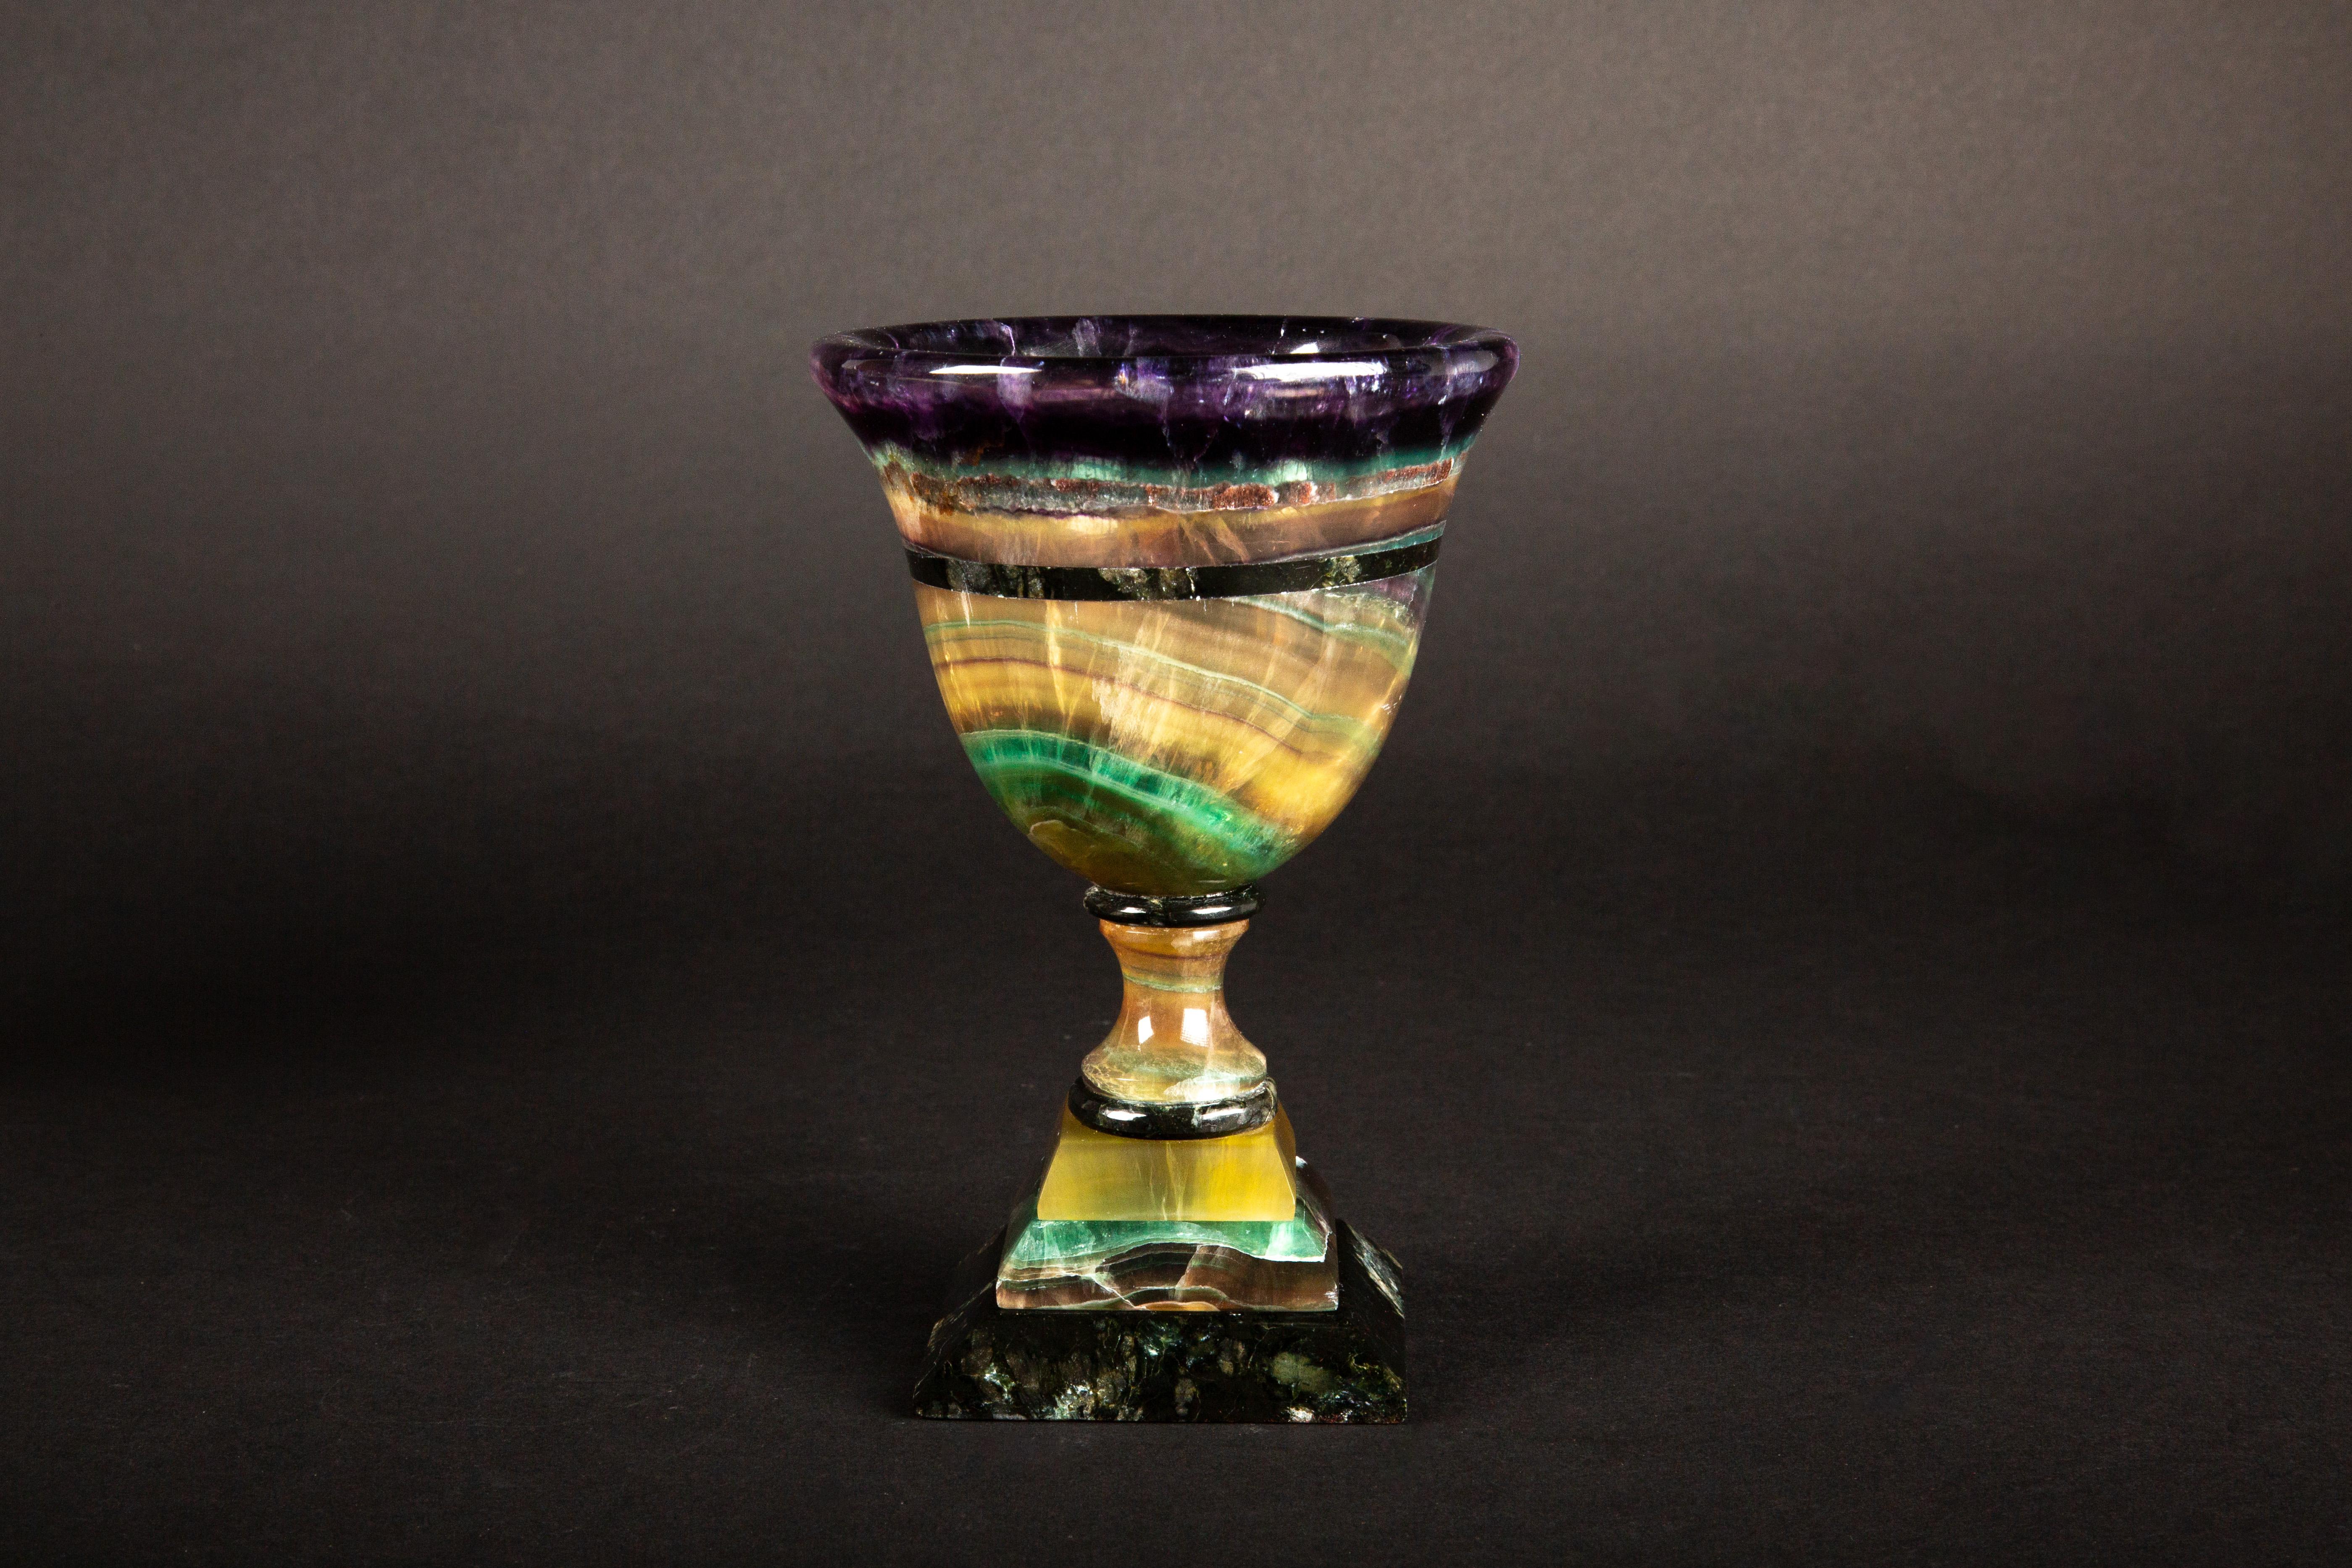 Crafted by skilled artisans in Argentina, this exquisite hand-carved chalice/cup showcases the captivating beauty of multi-colored fluorite. Originating from the depths of the earth, fluorite's unique hues swirl together in mesmerizing patterns,